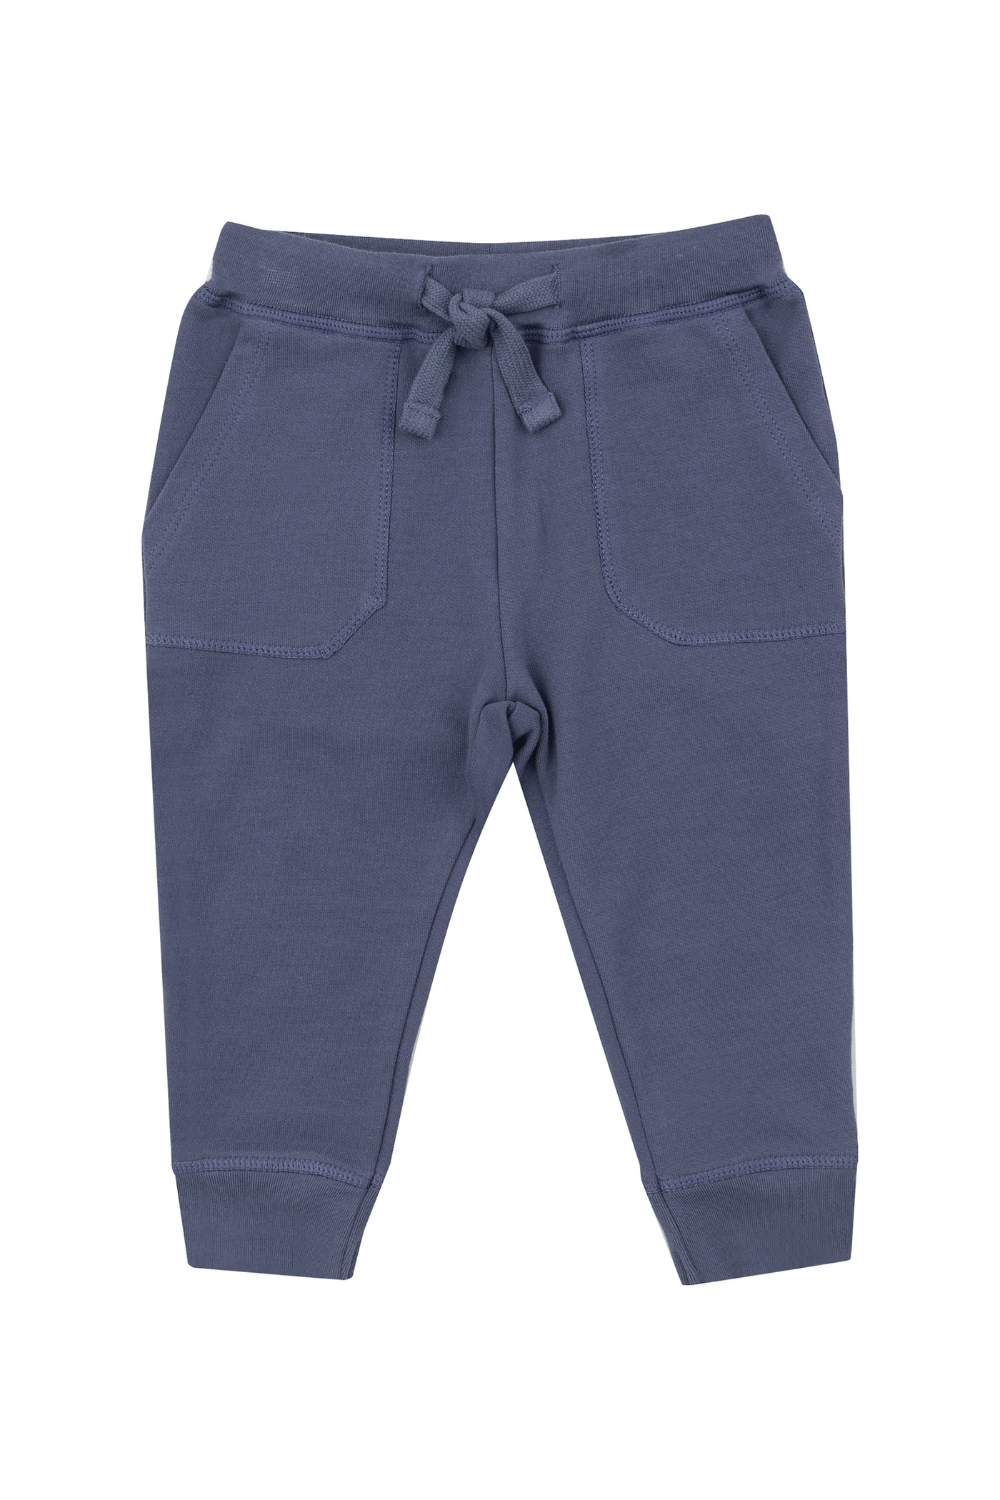 Angel Dear Footballs French Terry Joggers